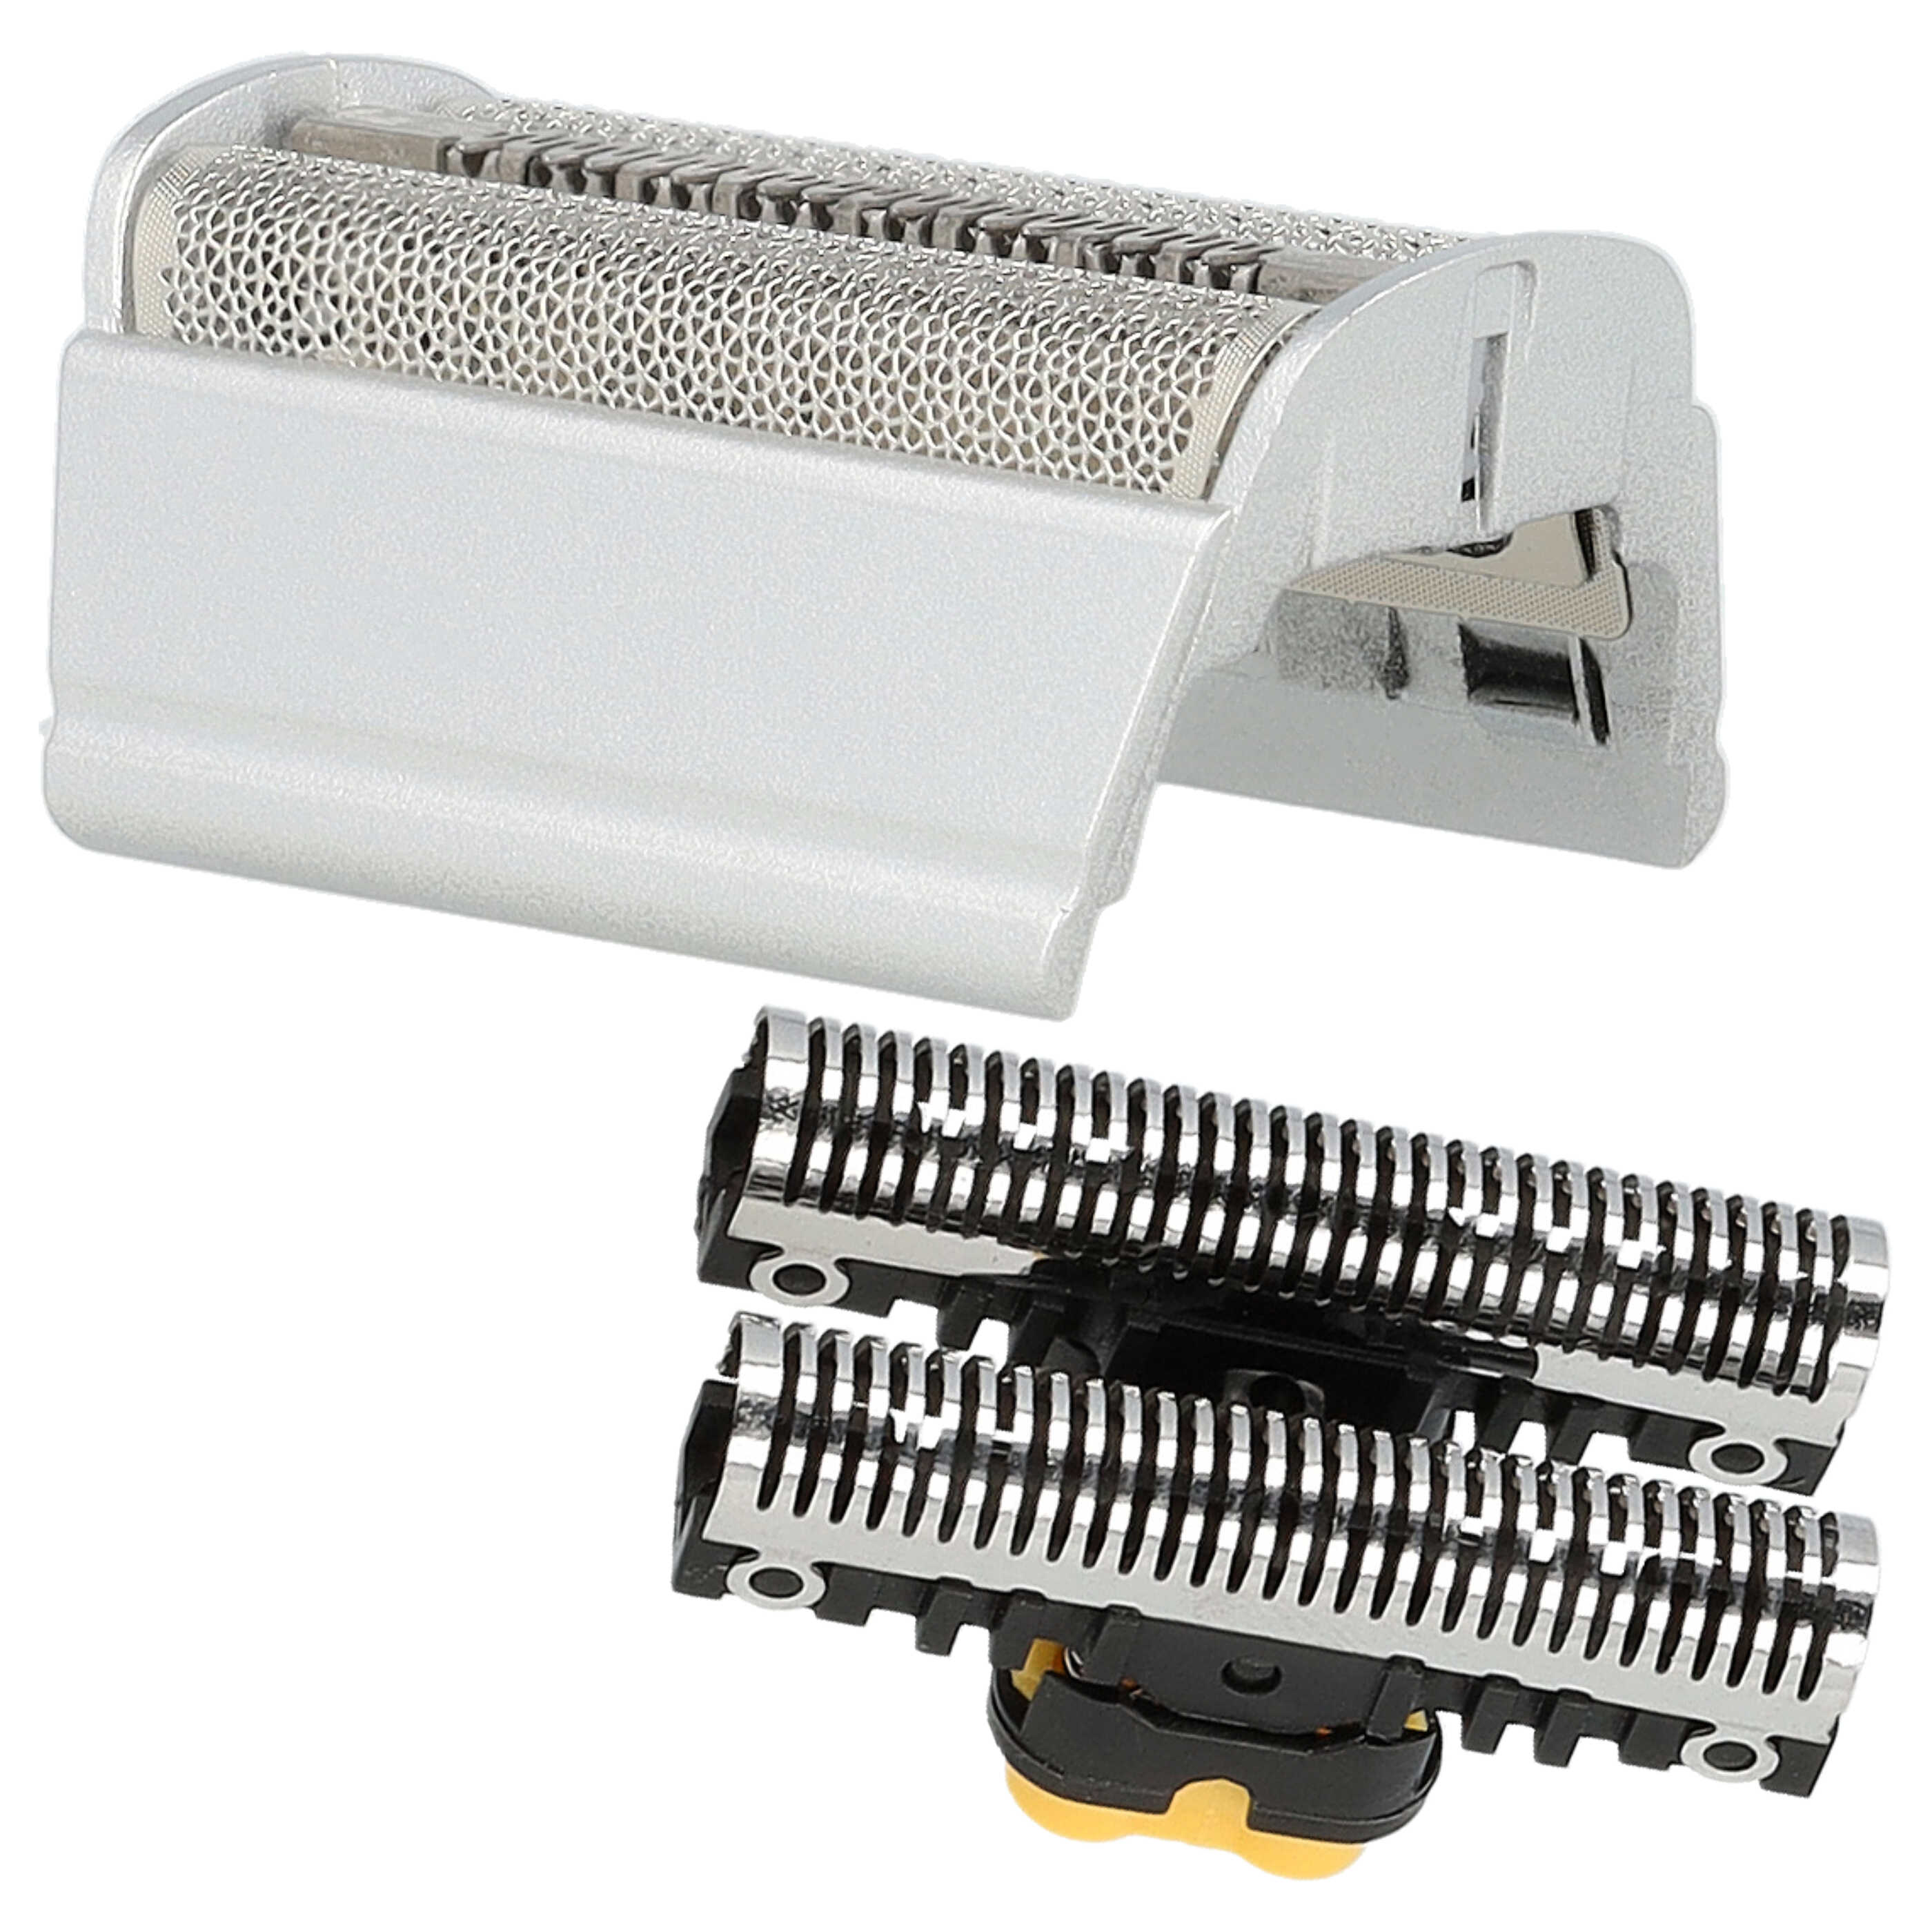 Combi Pack Shaver Part replaces Braun SB505, 31B, 31S for for Razor - Foil + Blades, Black/Silver